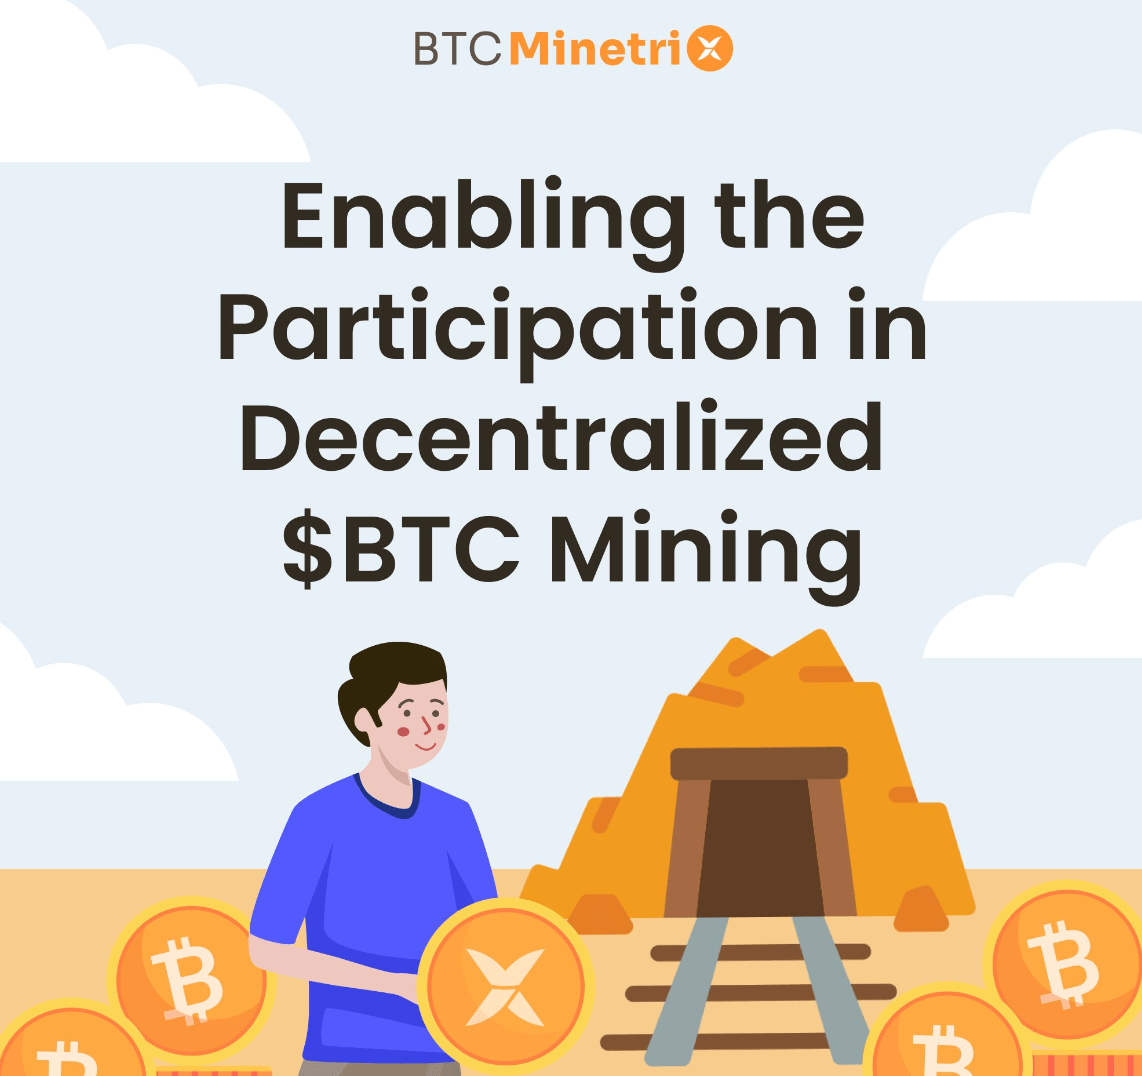 Bitcoin miners attract venture capital, new crypto mining project raises funds - 3